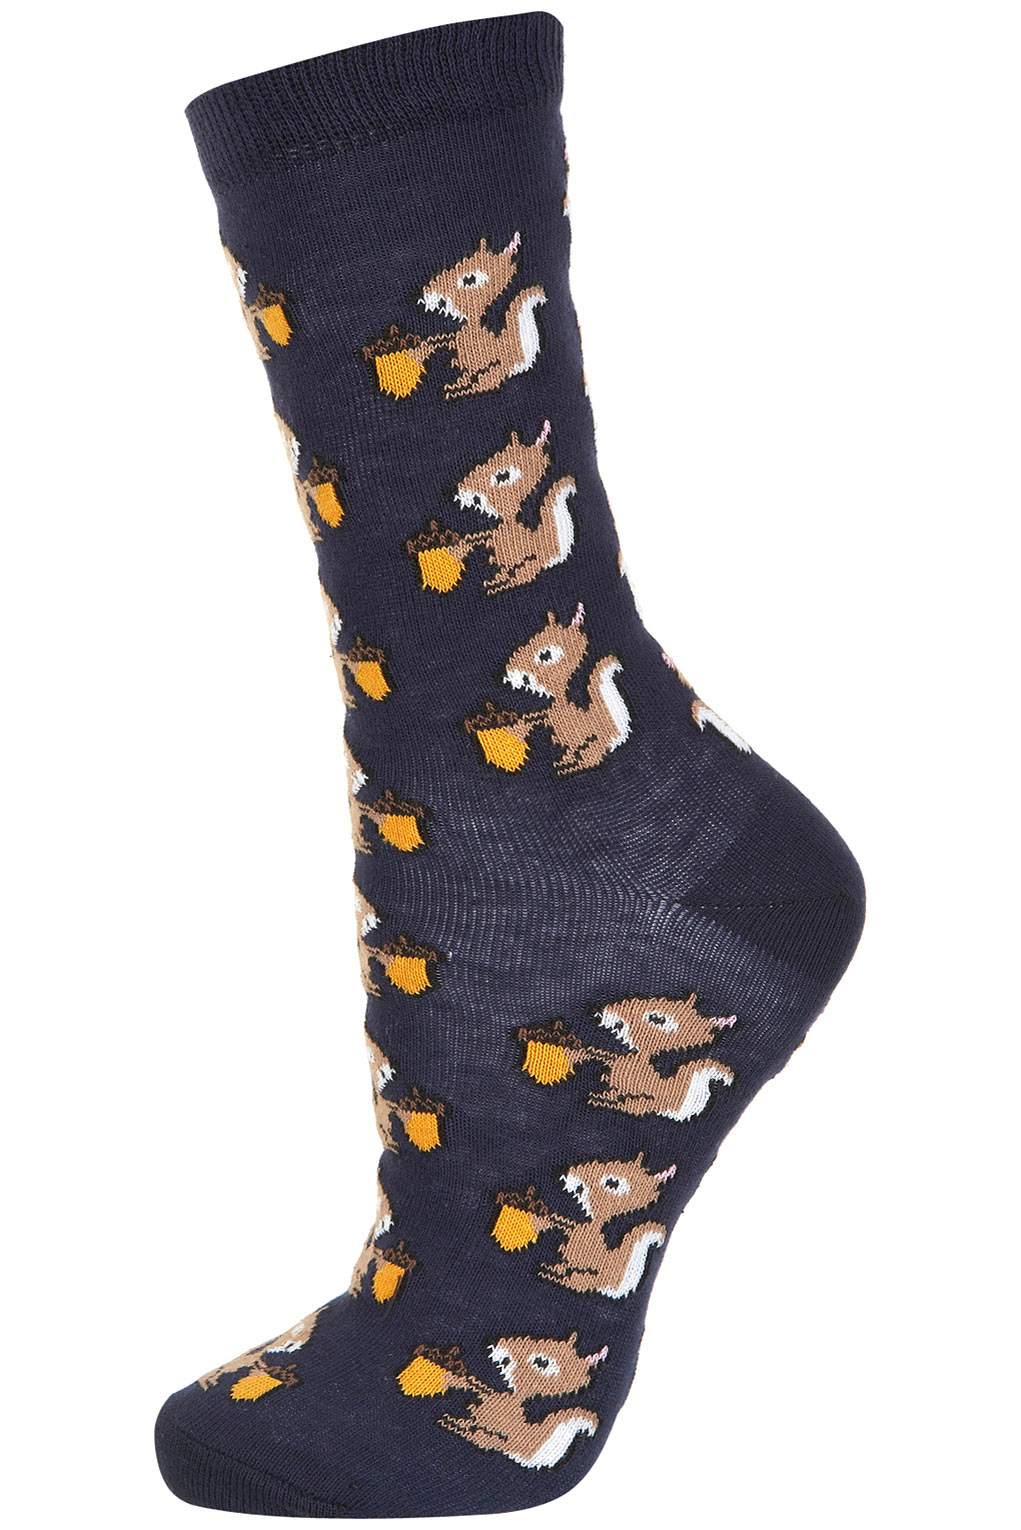 Lyst - Topshop Squirrel Ankle Socks in Blue